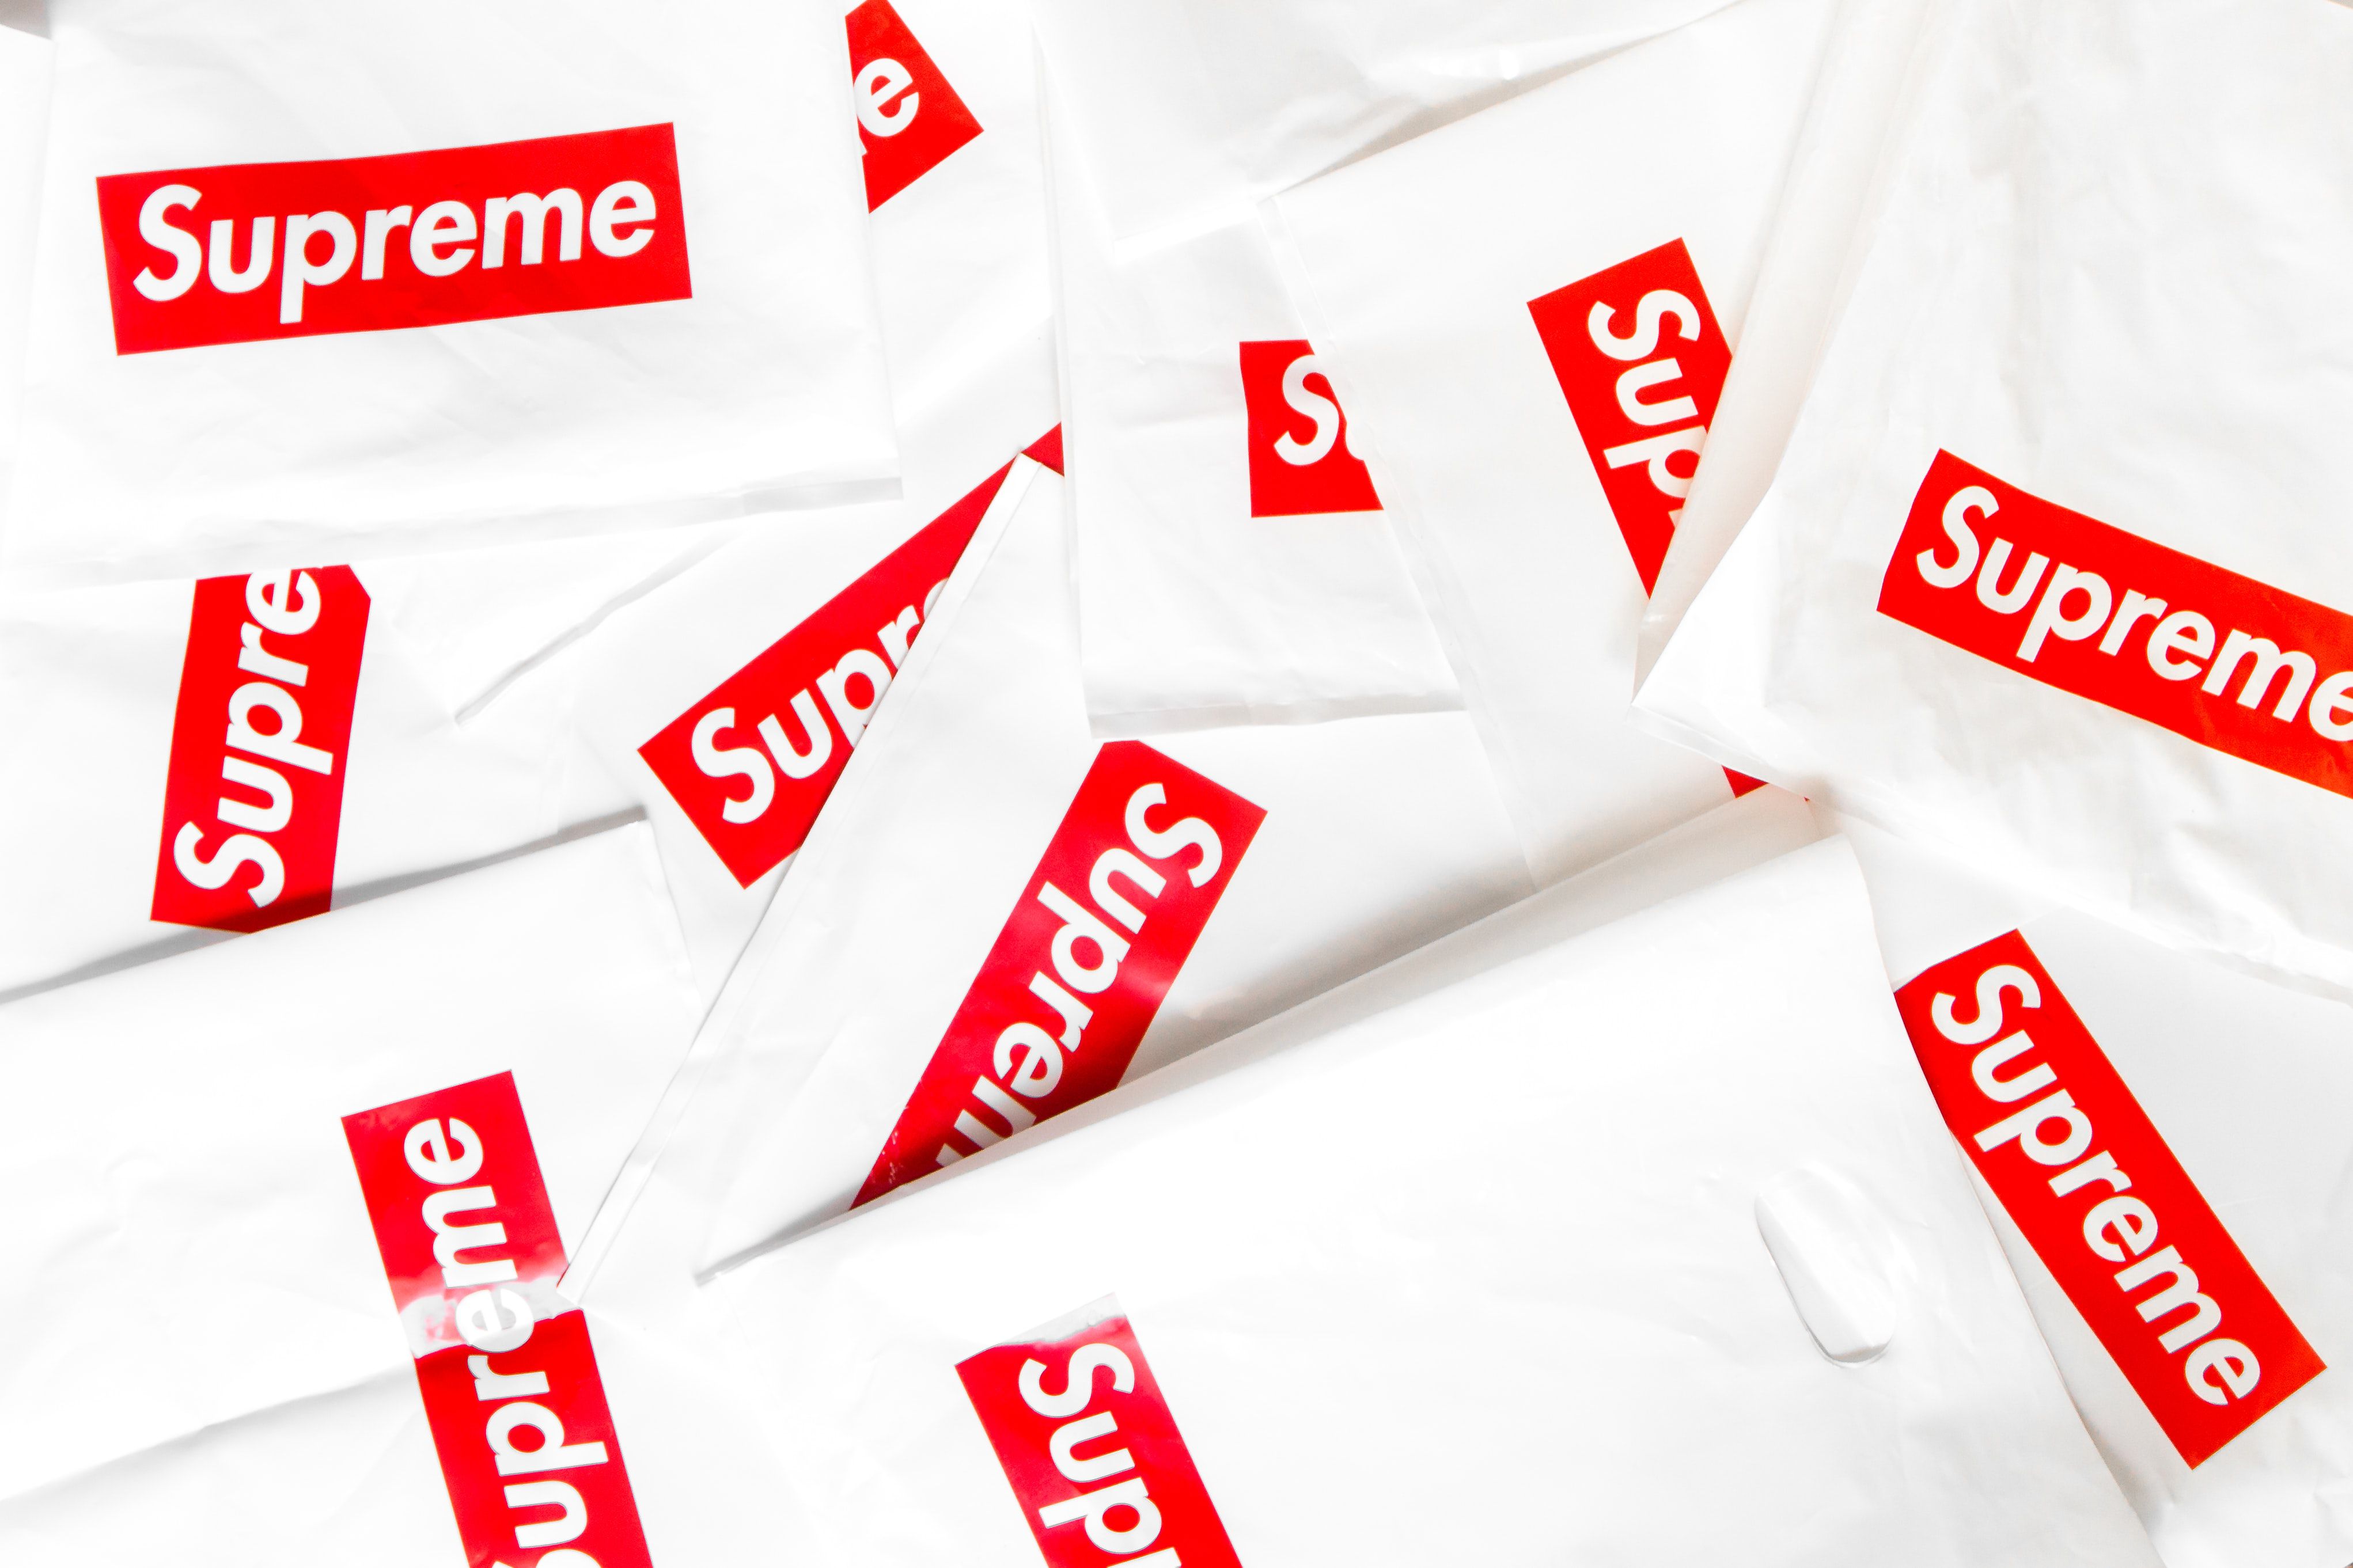 Supreme Bought for $2.1 Billion By Vans, Timberland Owner